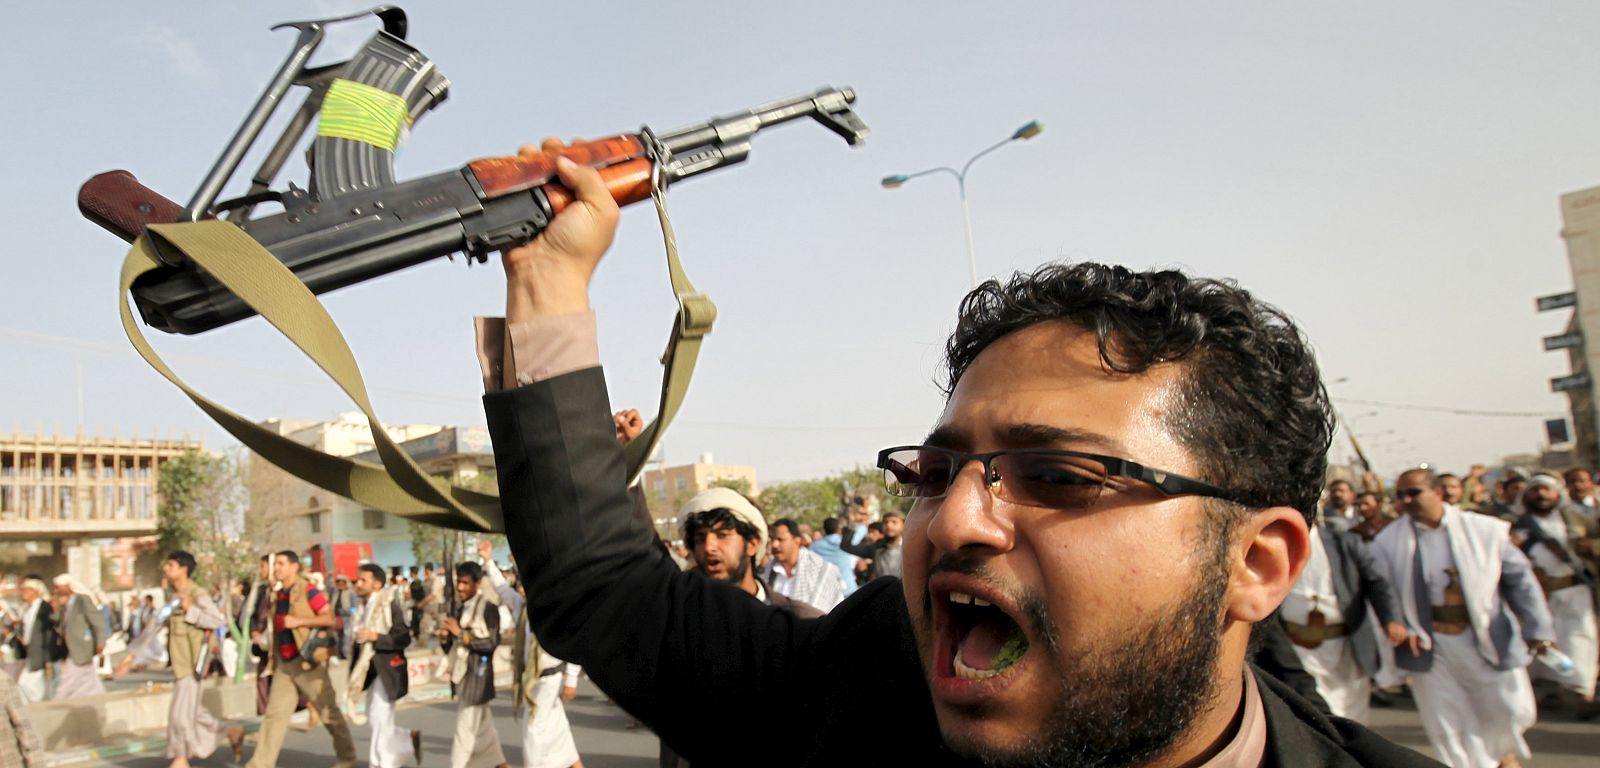 Follower of the Houthi movement shouts slogans during a protest against the Saudi-led air strikes in Sanaa